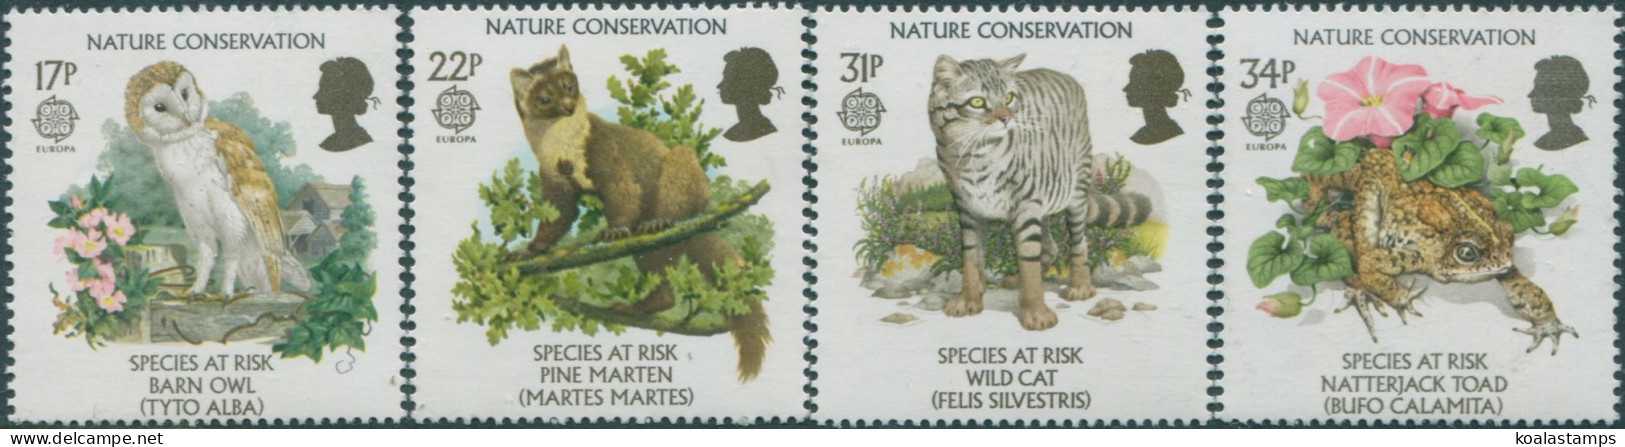 Great Britain 1986 SG1320-1323 QEII Nature Conservation Set MNH - Unclassified